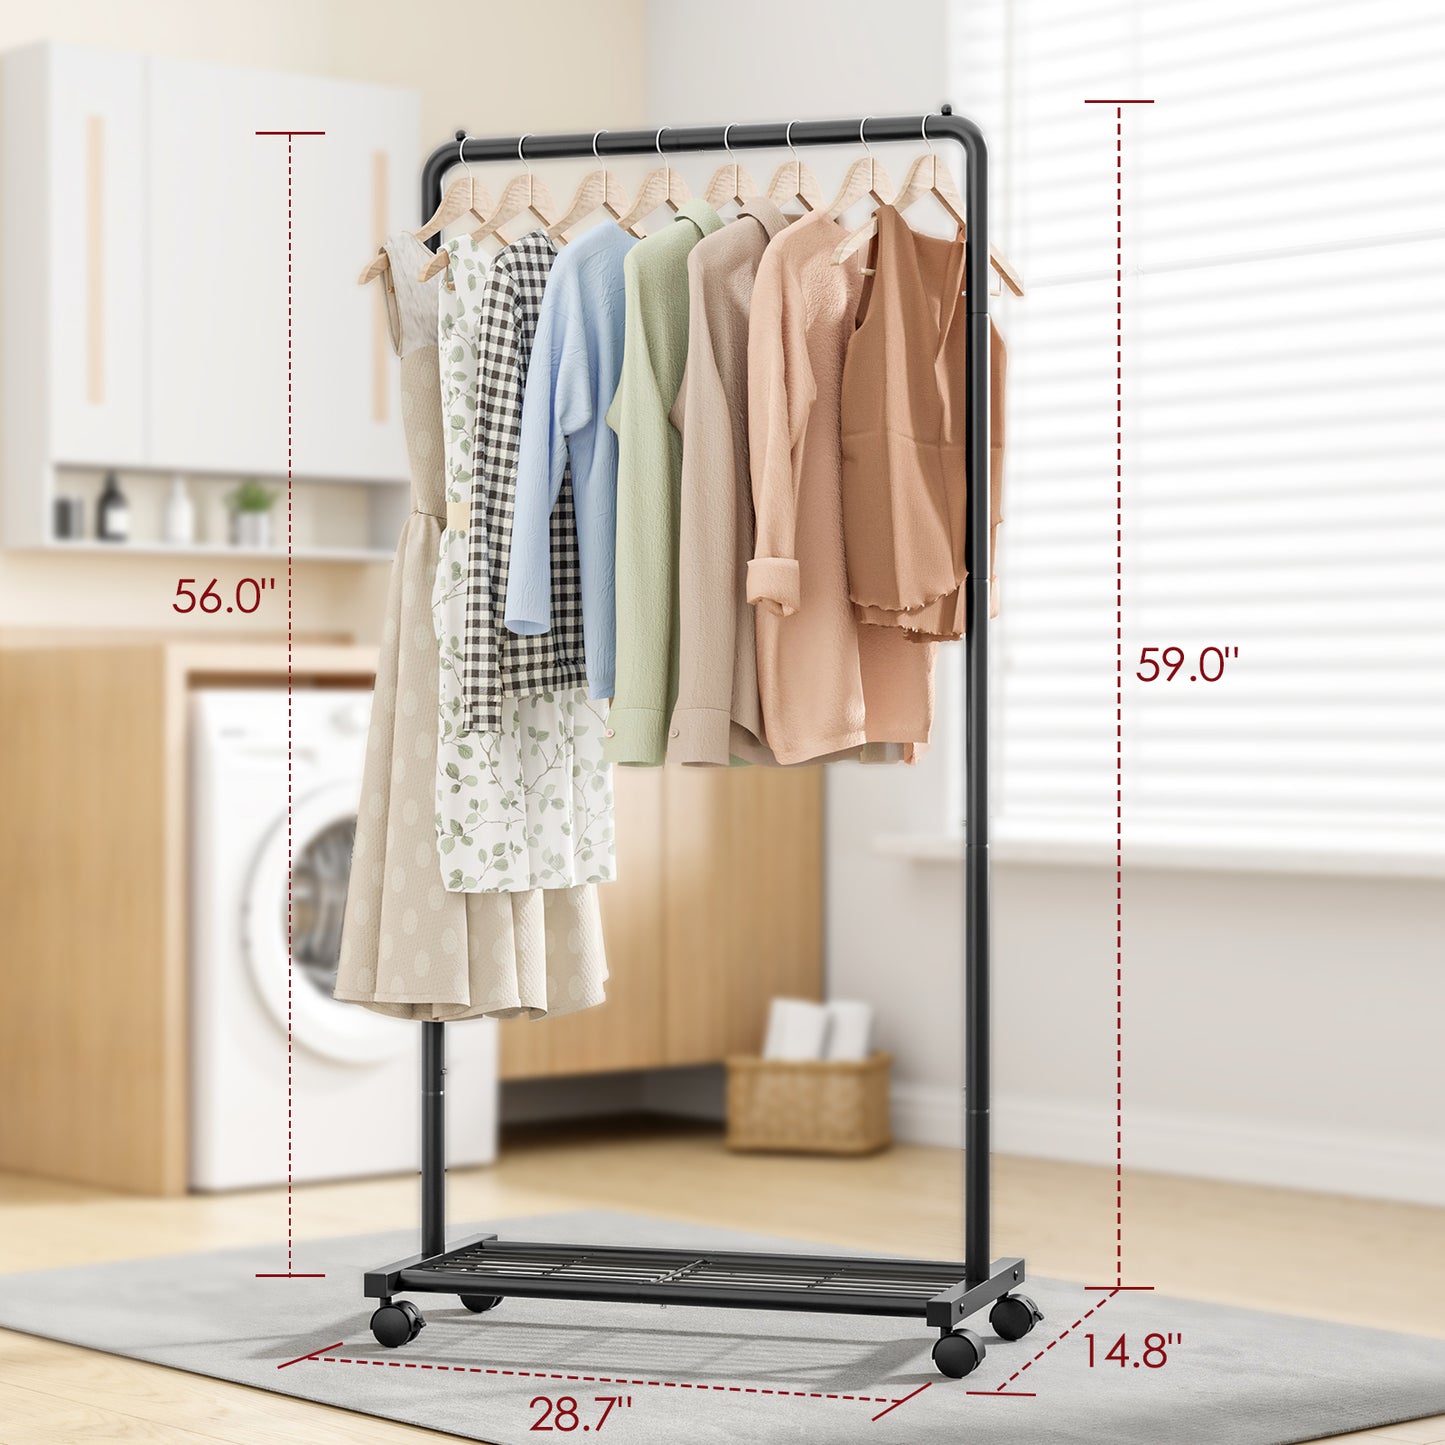 Sakugi Clothes Rack - Black Clothing Rack with Storage Mesh Shelf & Casters, Heavy-Duty Metal Clothing Rack for Hanging Clothes, Dresses, Sweaters, Coats, Large Load Capacity, Easy to Assemble